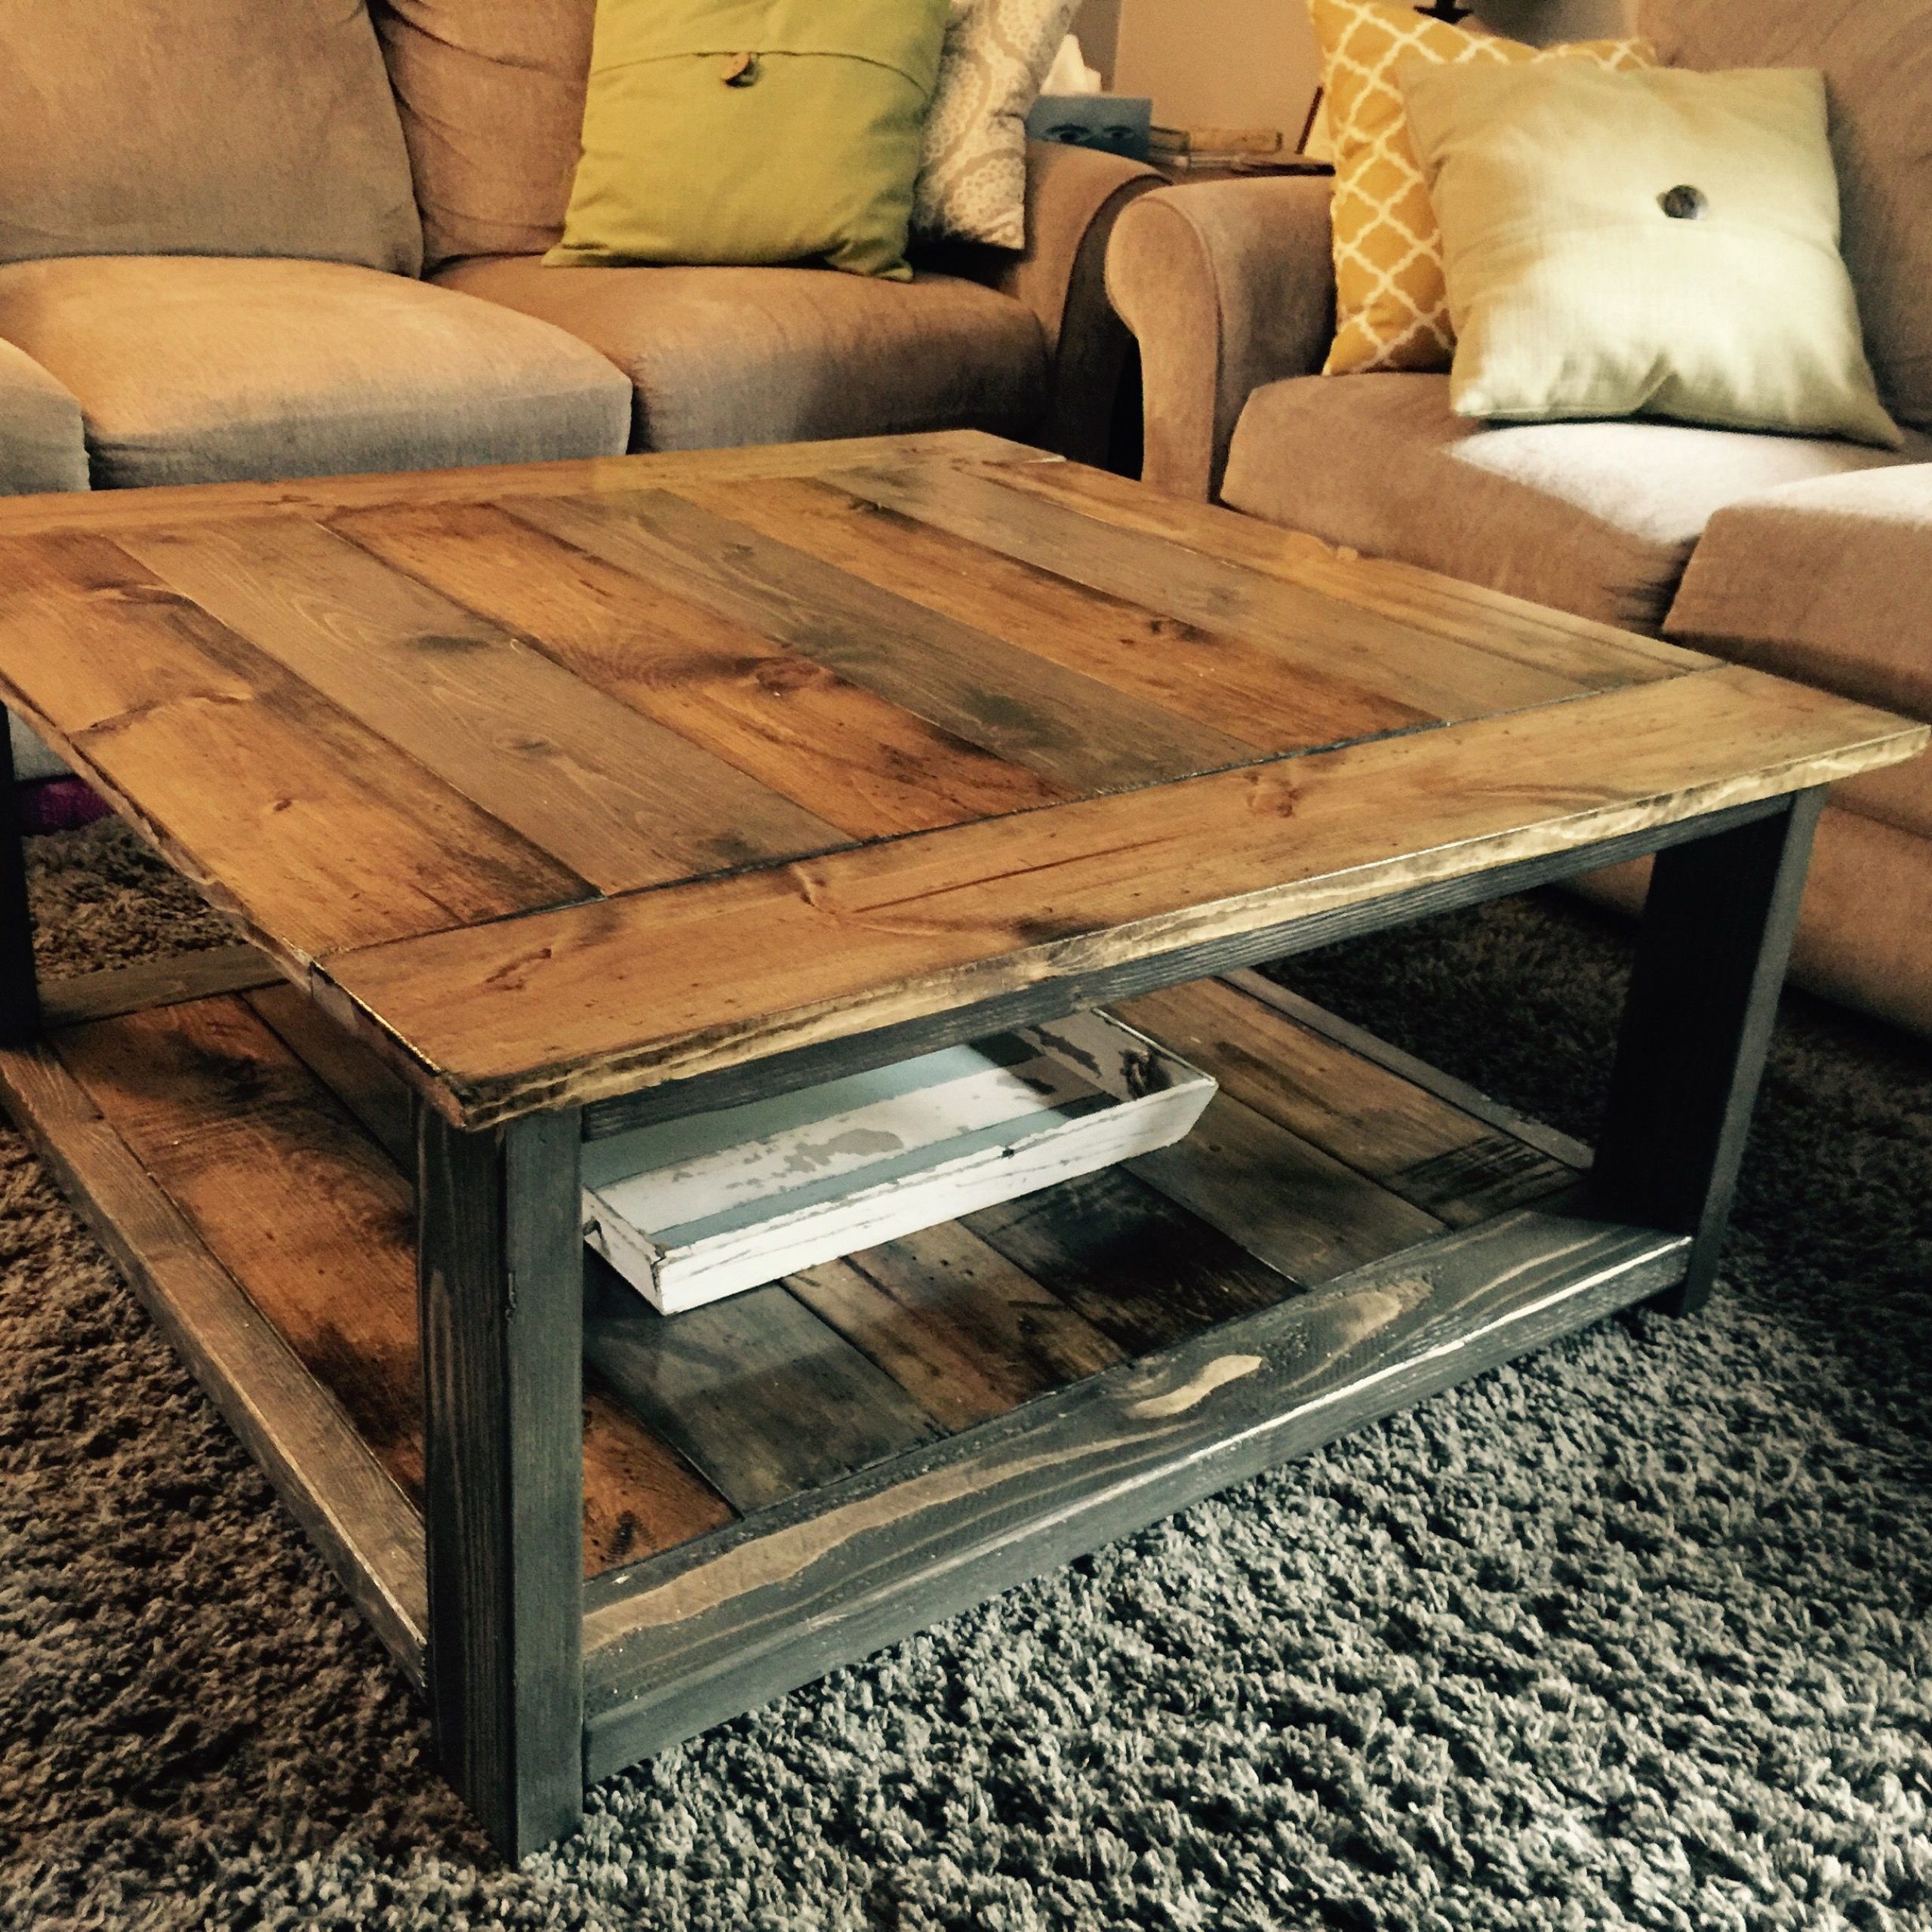 Rustic Xless Coffee Table | Do It Yourself Home Projects From Ana White Regarding Rustic Wood Coffee Tables (View 9 of 20)